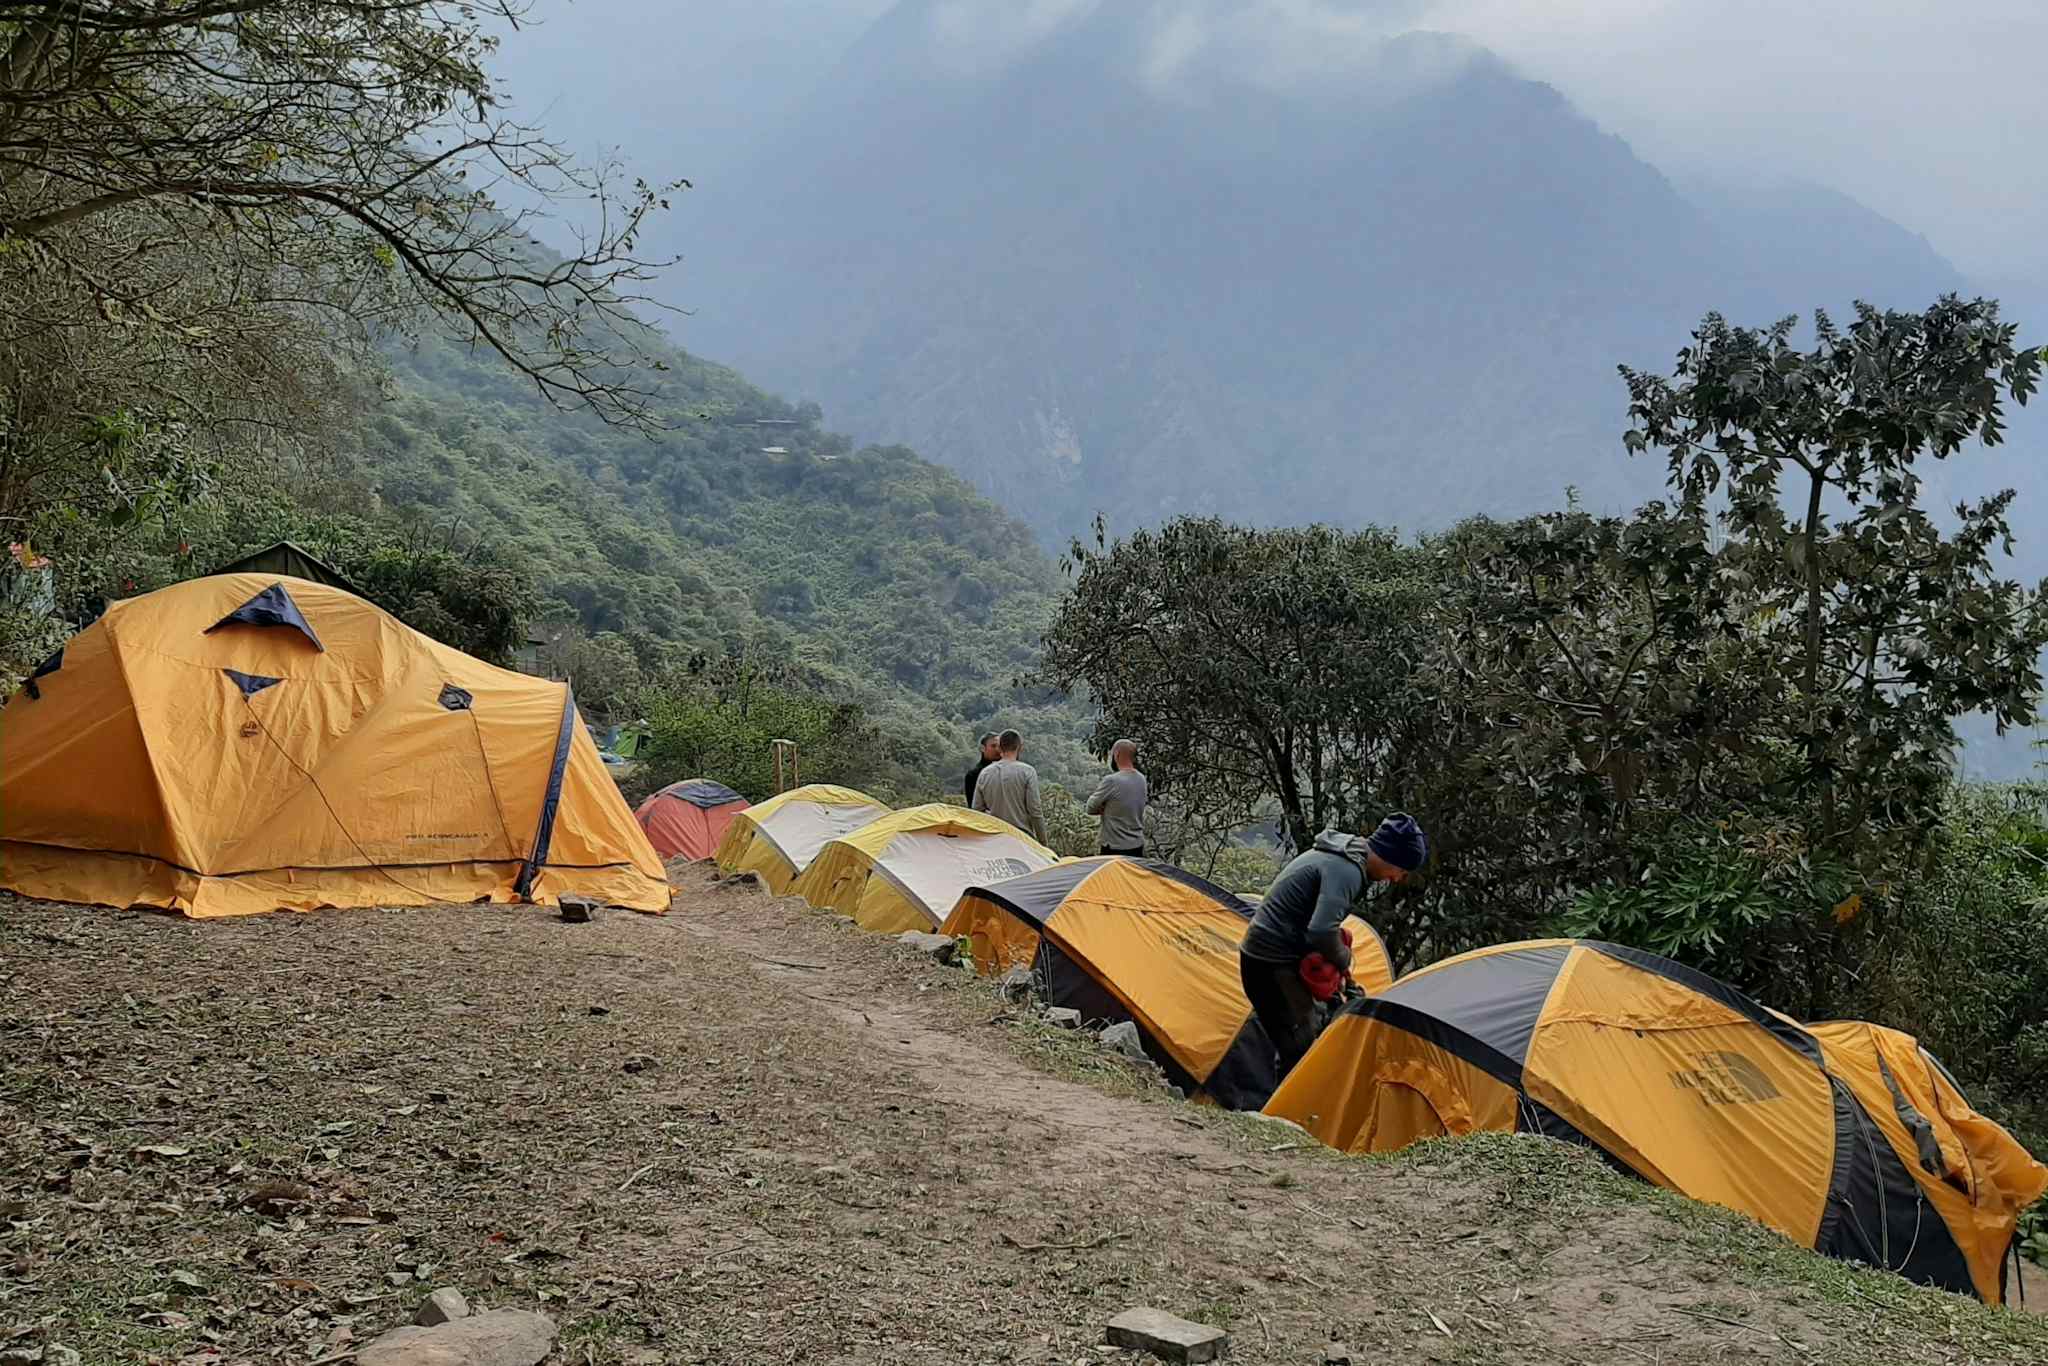 Camp set up on the Choquequirao trail.